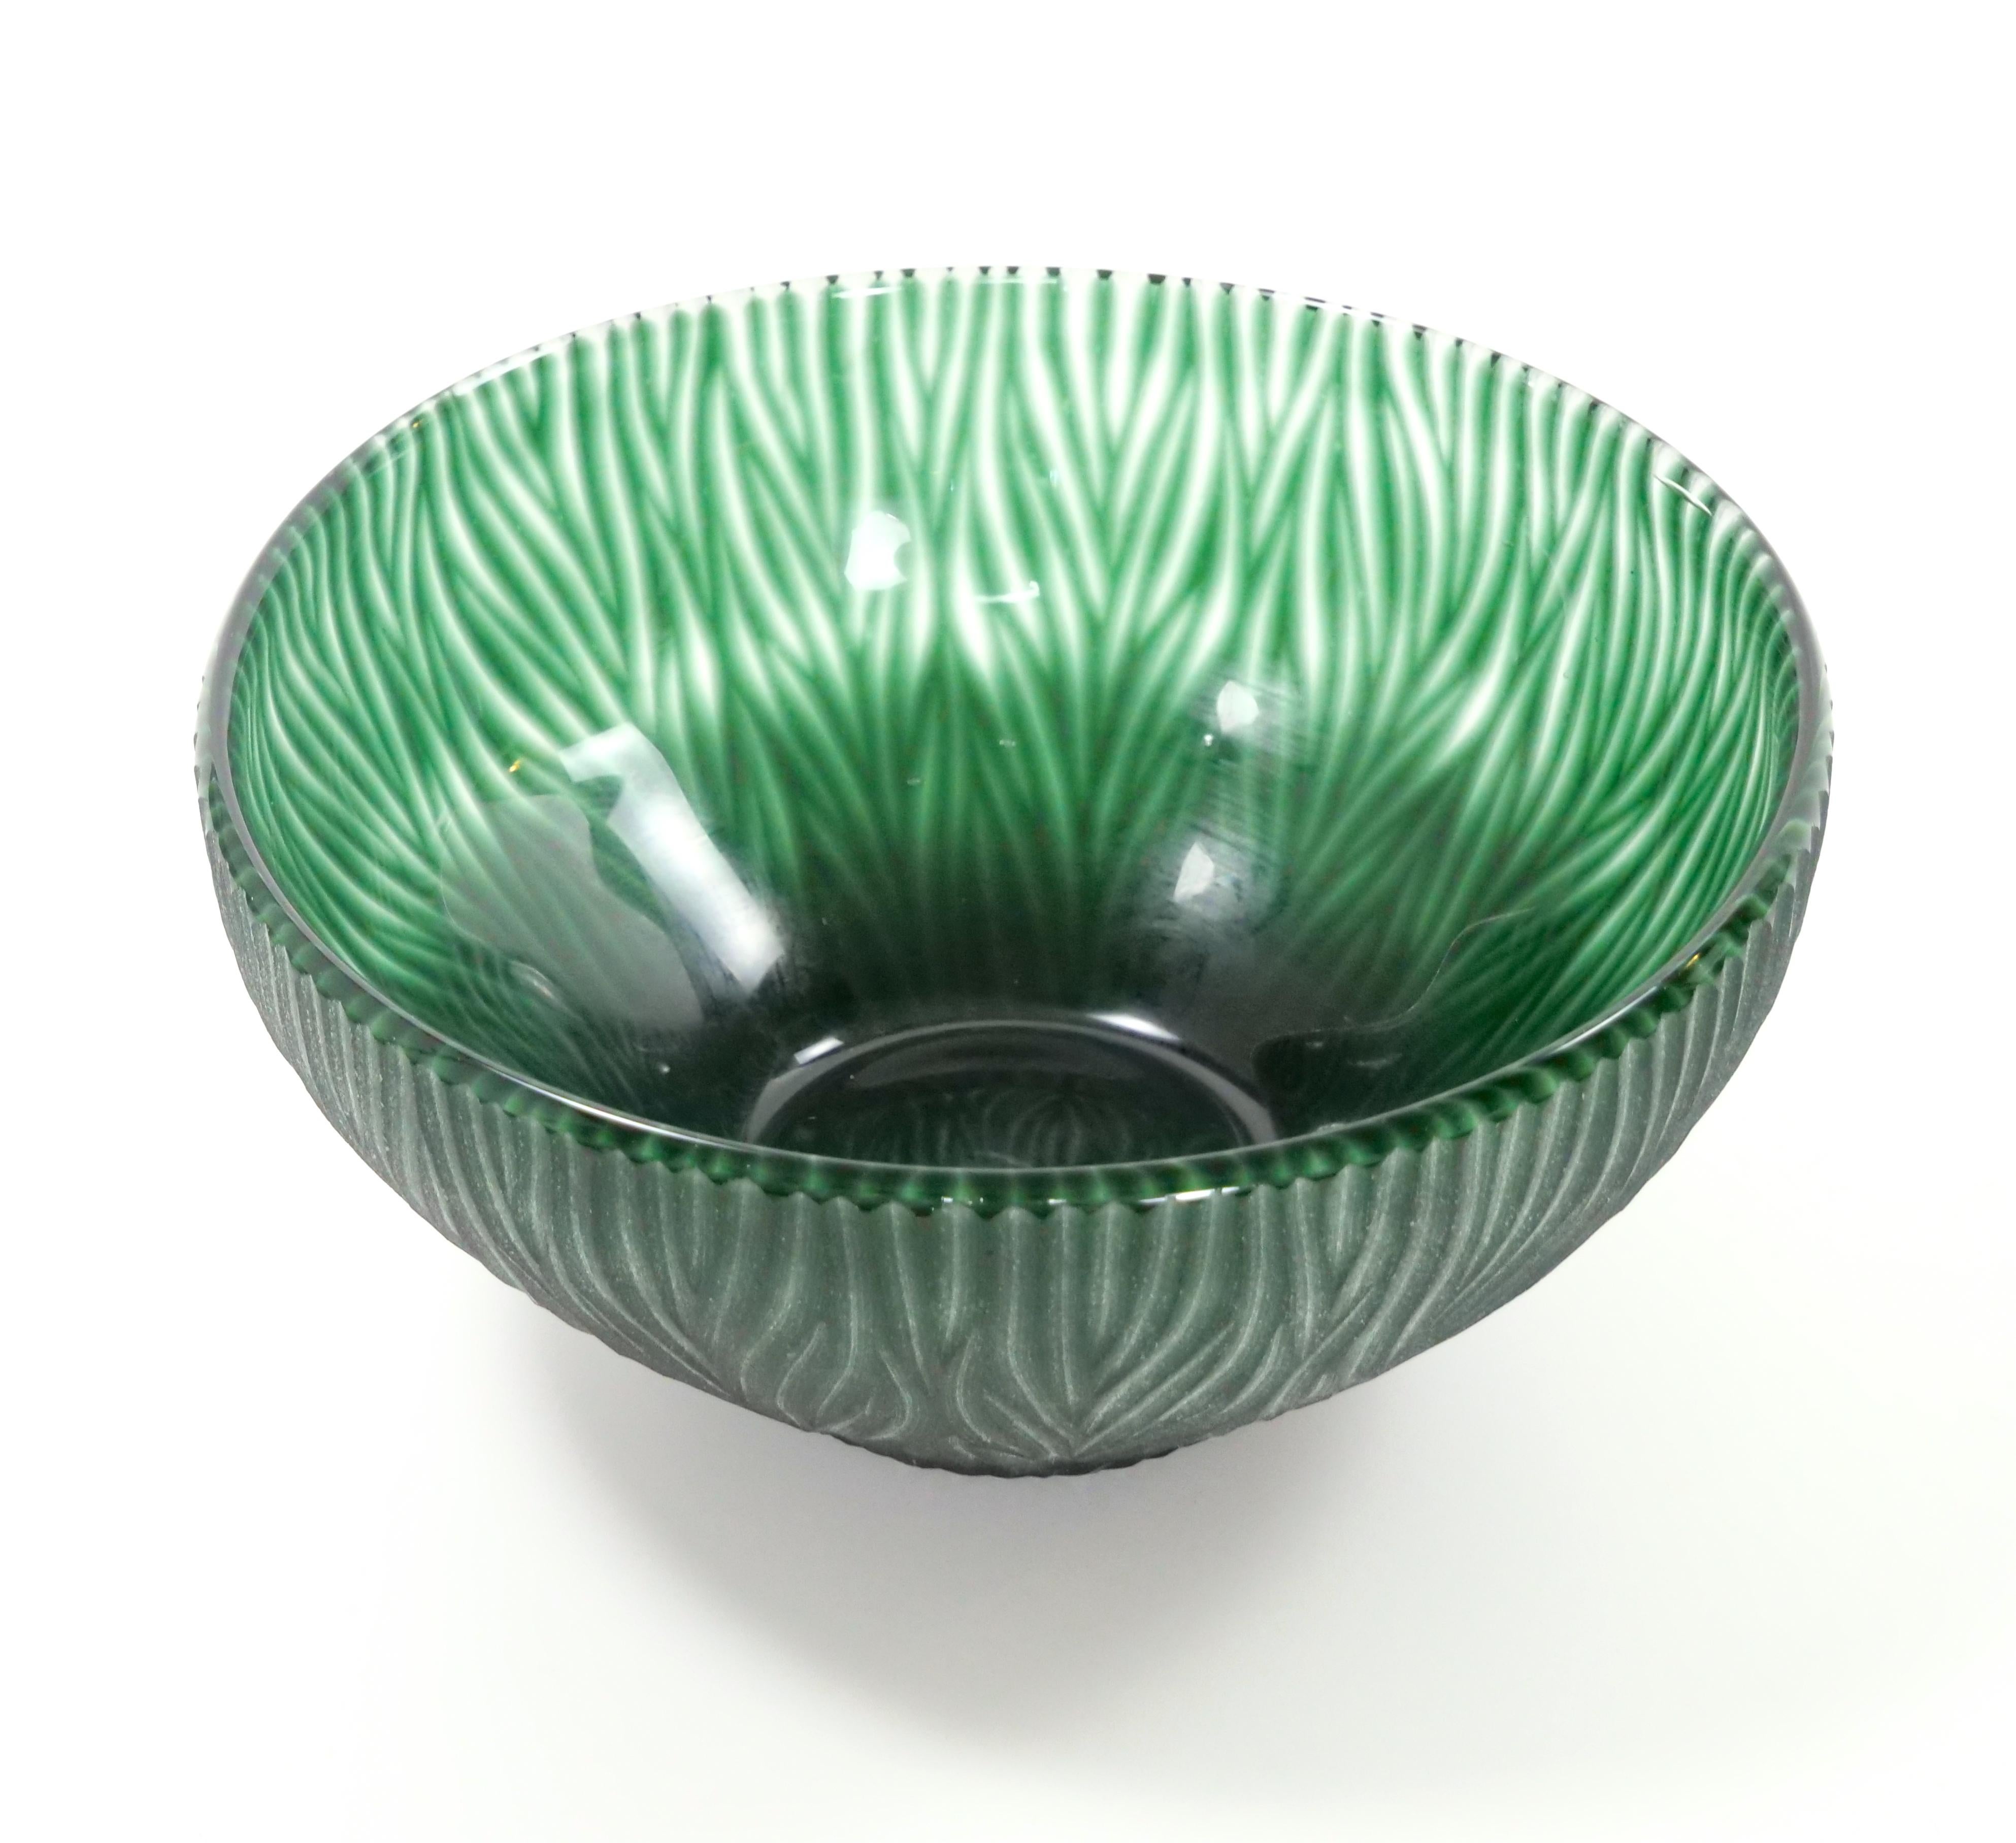 Presenting a stunning late 20th century hand-crafted, mouth-blown Murano glass decorative centerpiece bowl. This exquisite piece showcases a captivating exterior design, highlighting the exceptional artistry of Murano glassmakers. The bowl